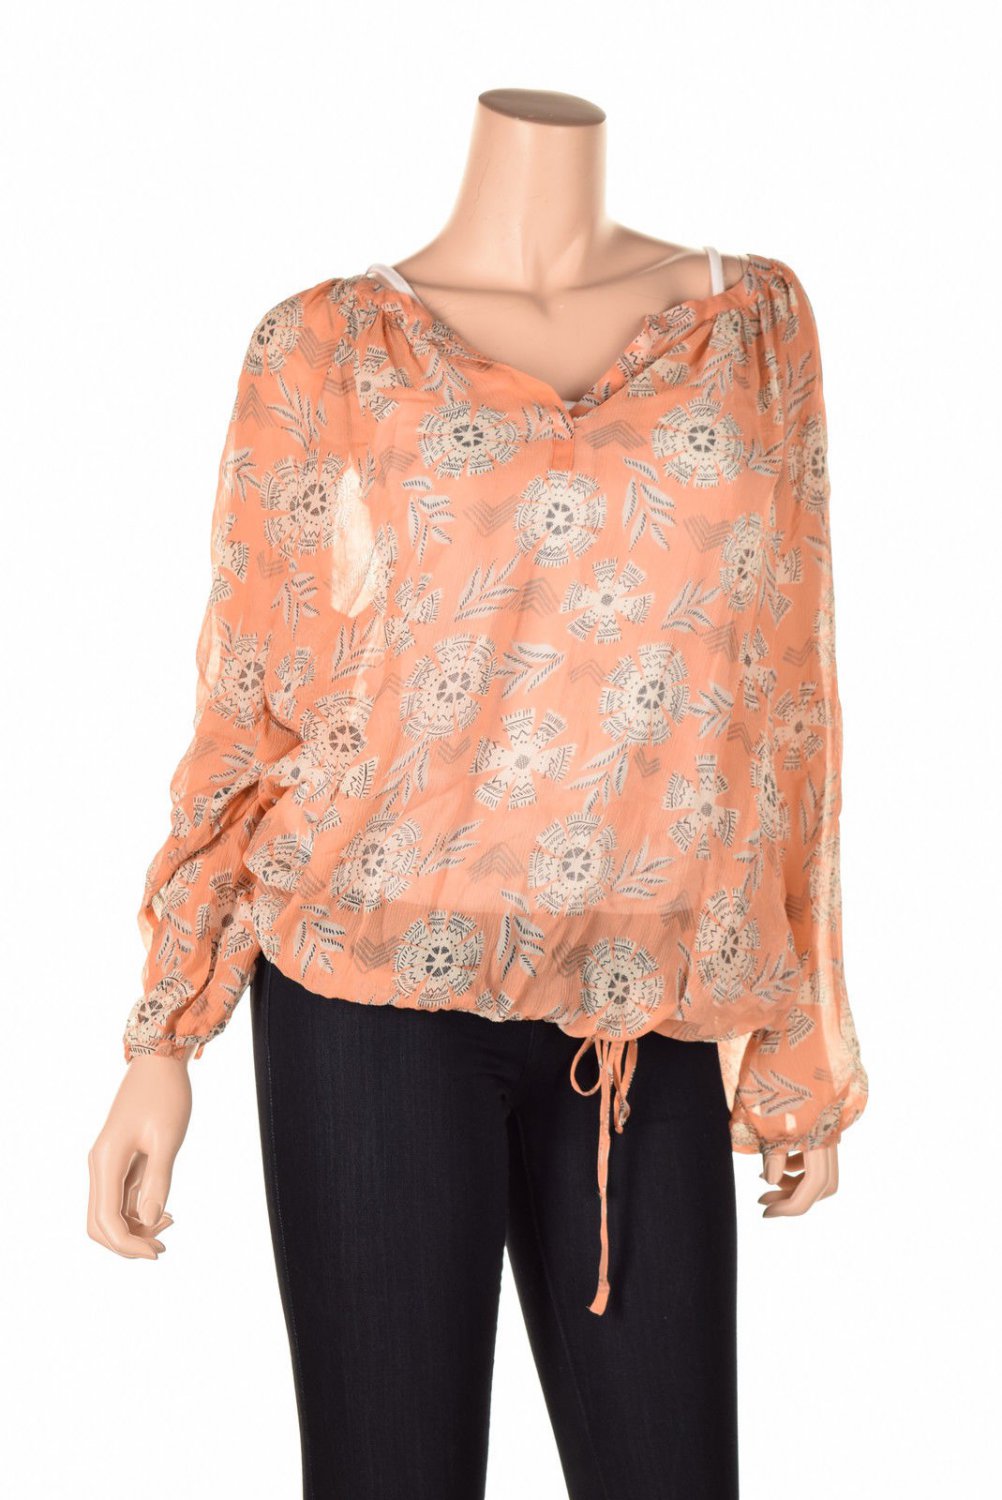 new Lucky Brand Jeans Long Sleeve Sheer Printed Peas Coral Multi Xl ...